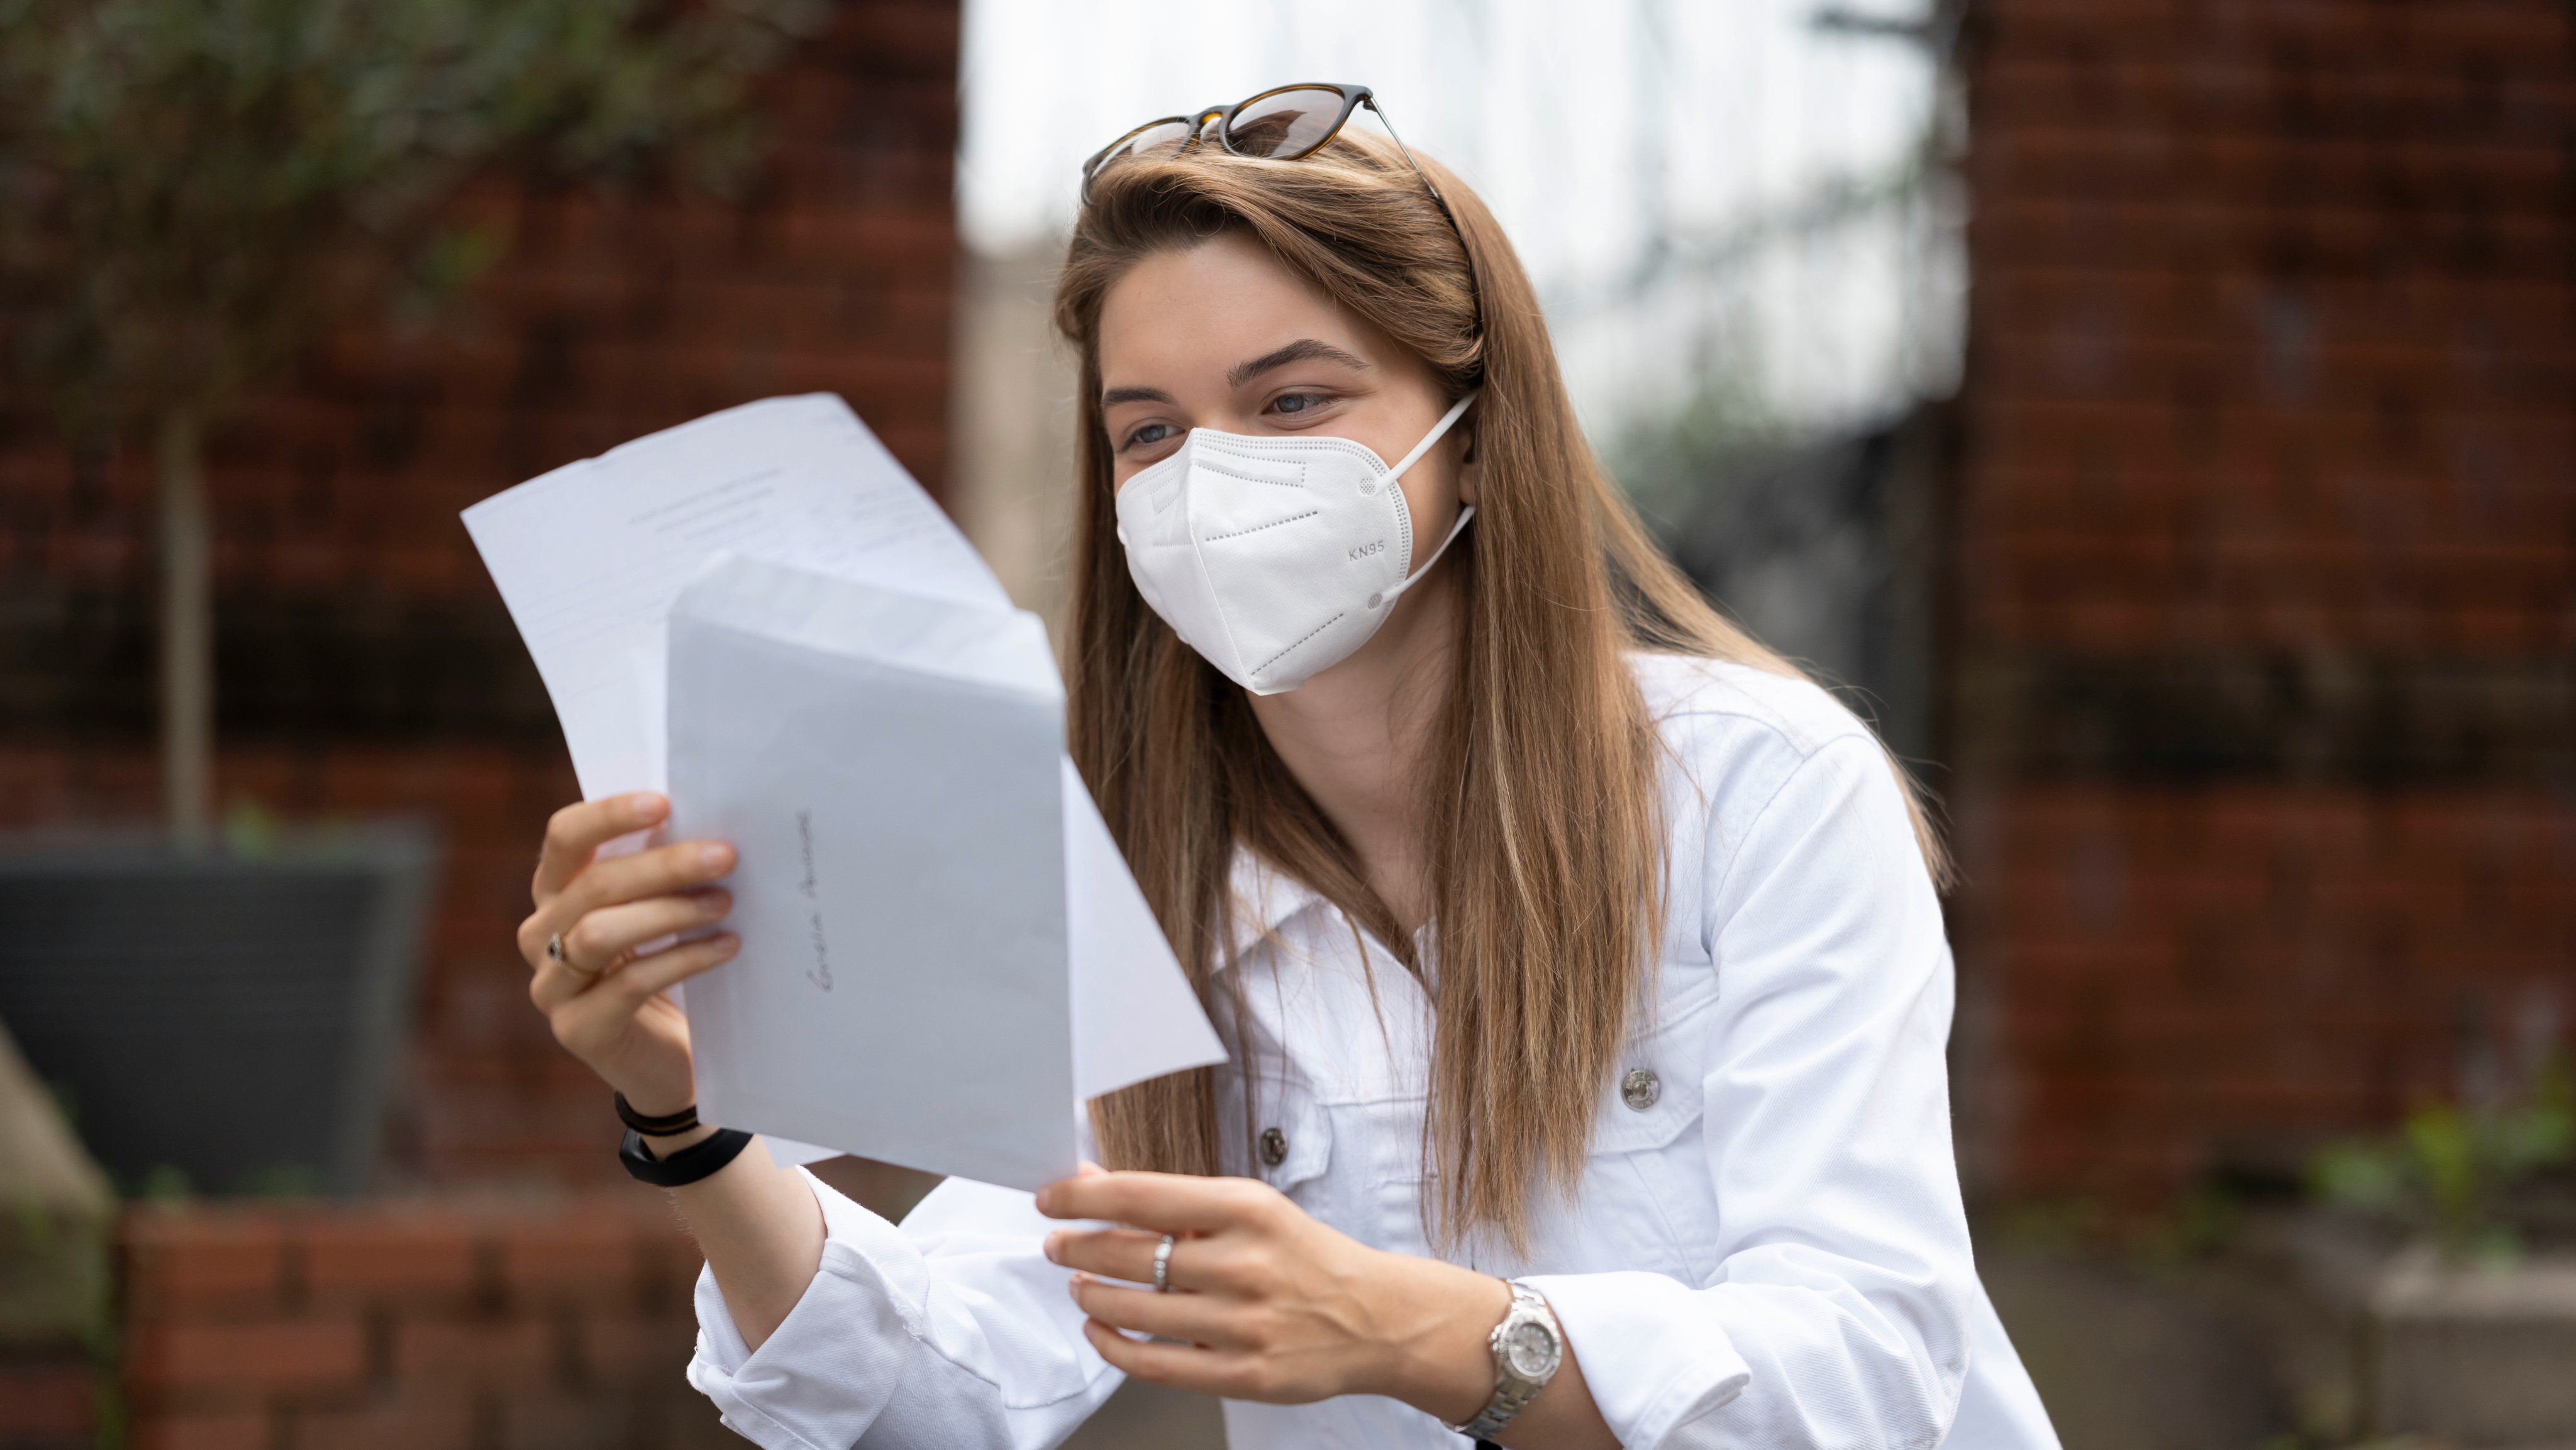 Students Receive A&#039; Level Results During Coronavirus Pandemic